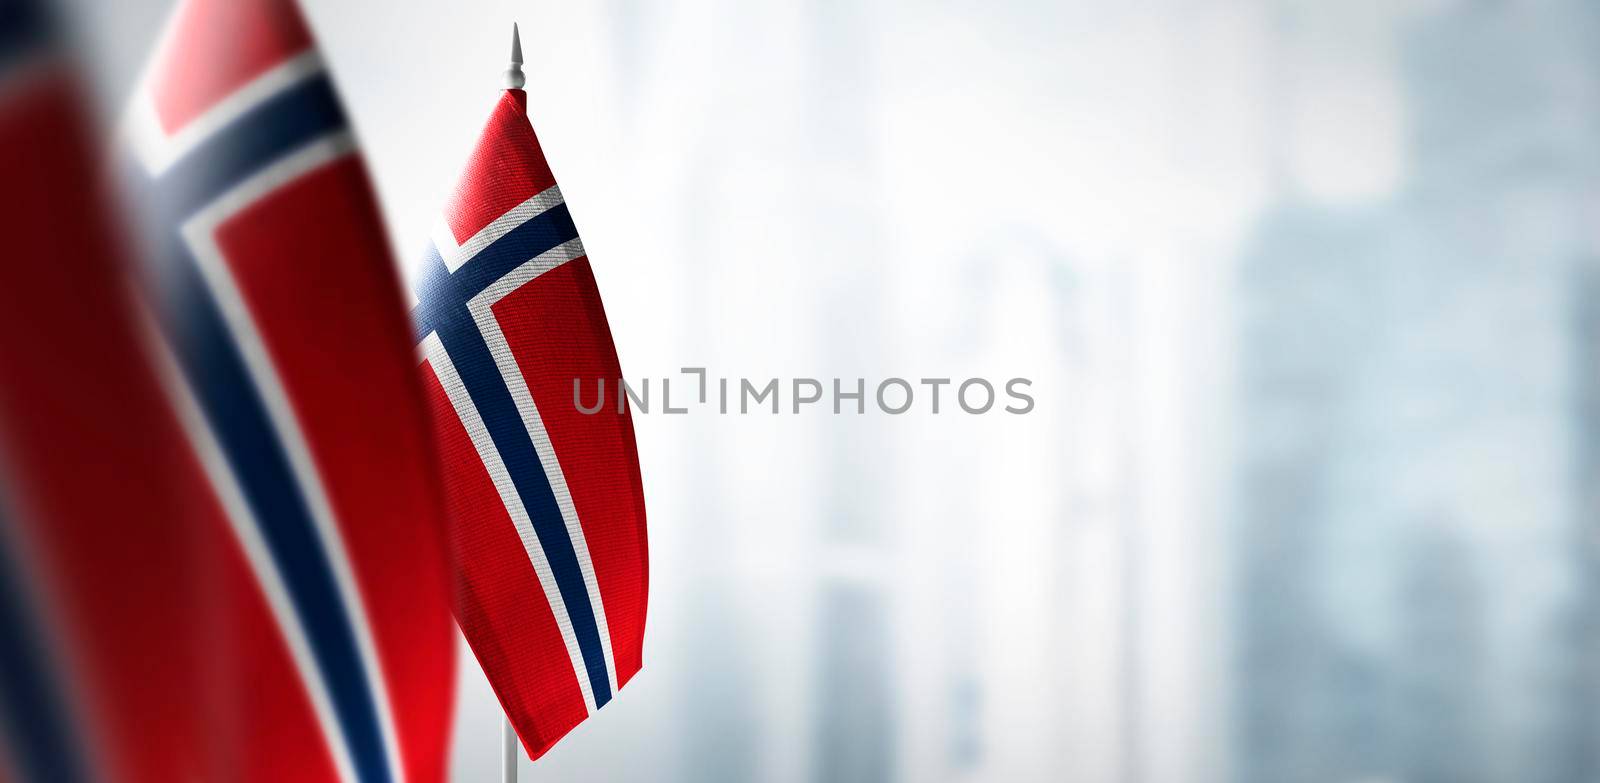 Small flags of Norway on a blurry background of the city.